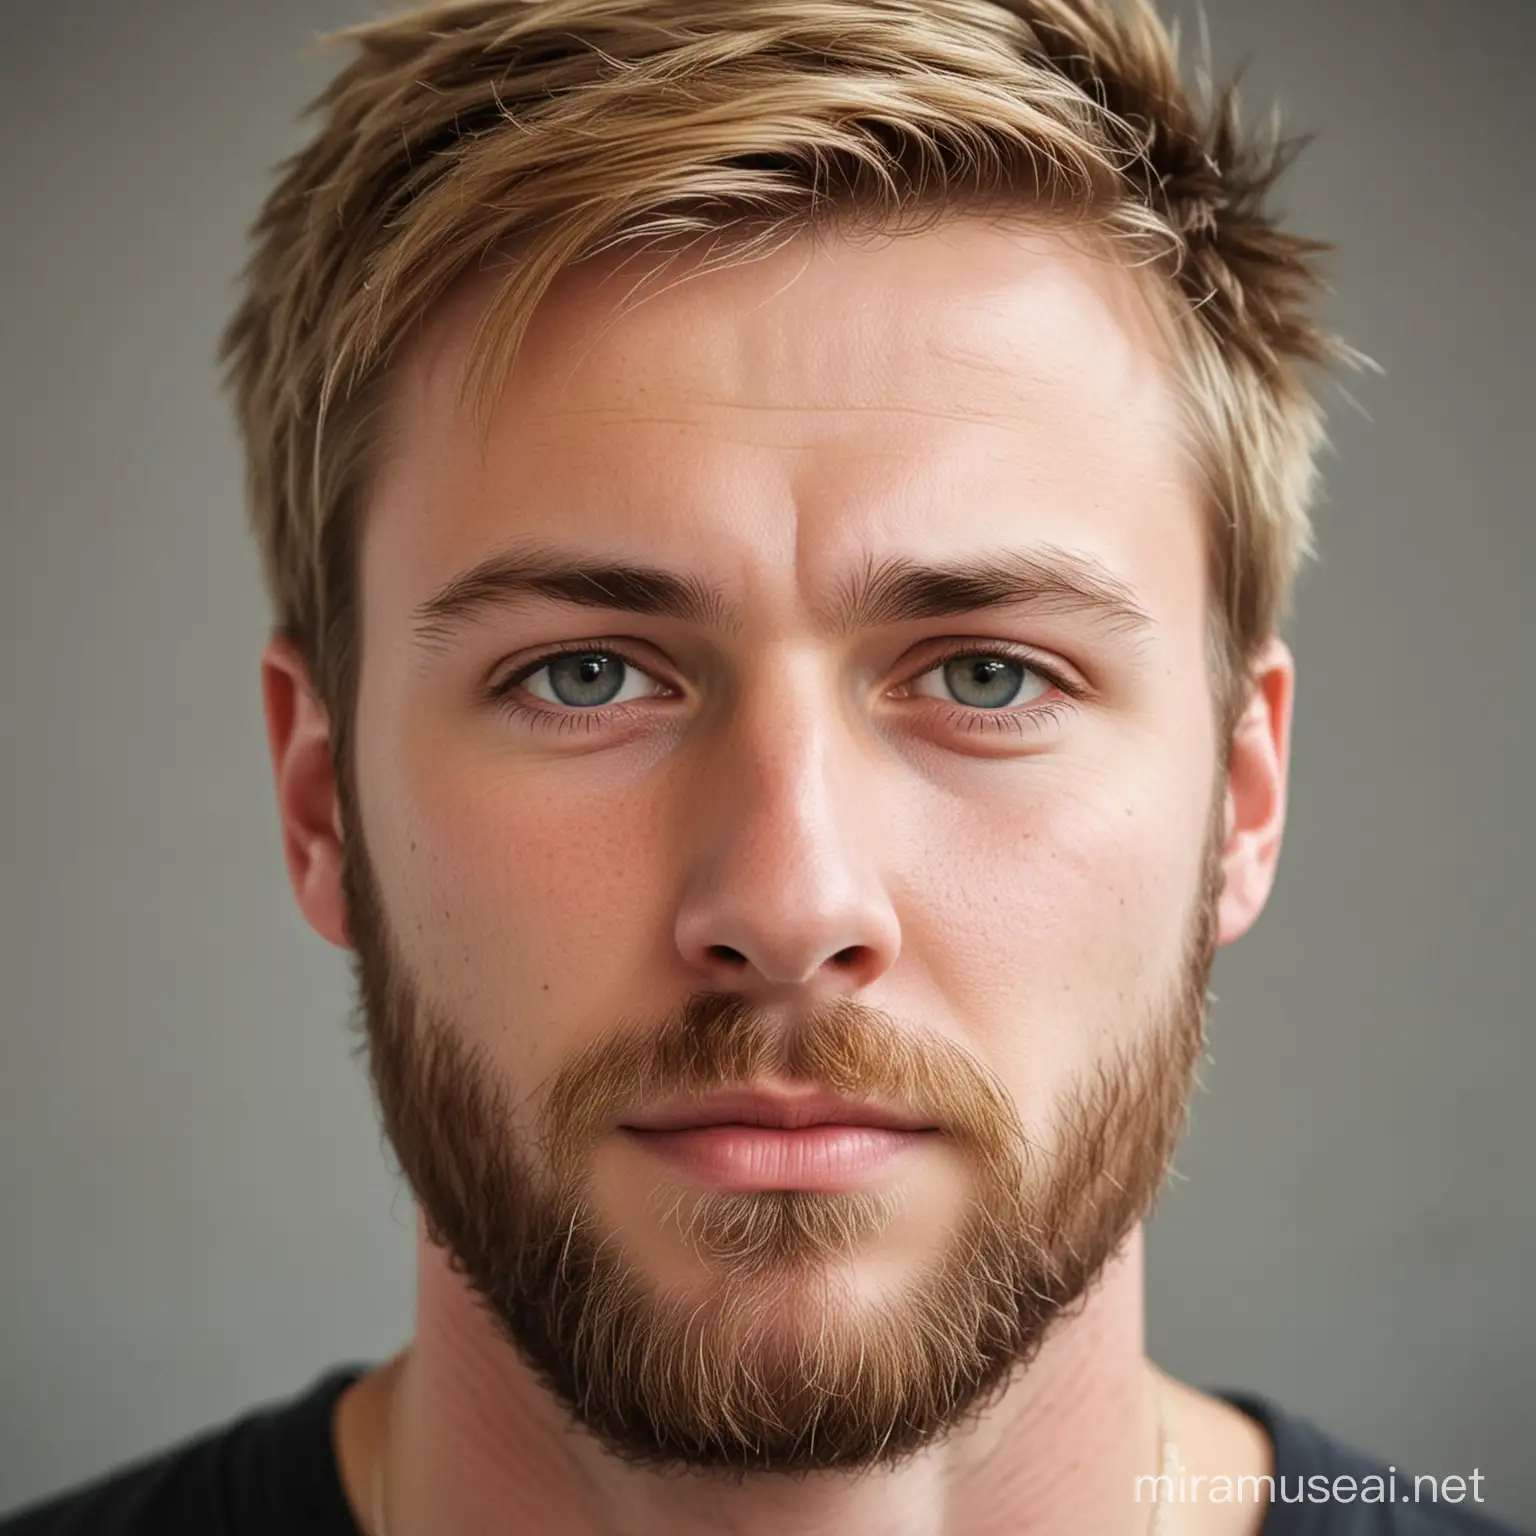 lighthaired Nordic guy mid 30 with beard and narrow nose. Average weight